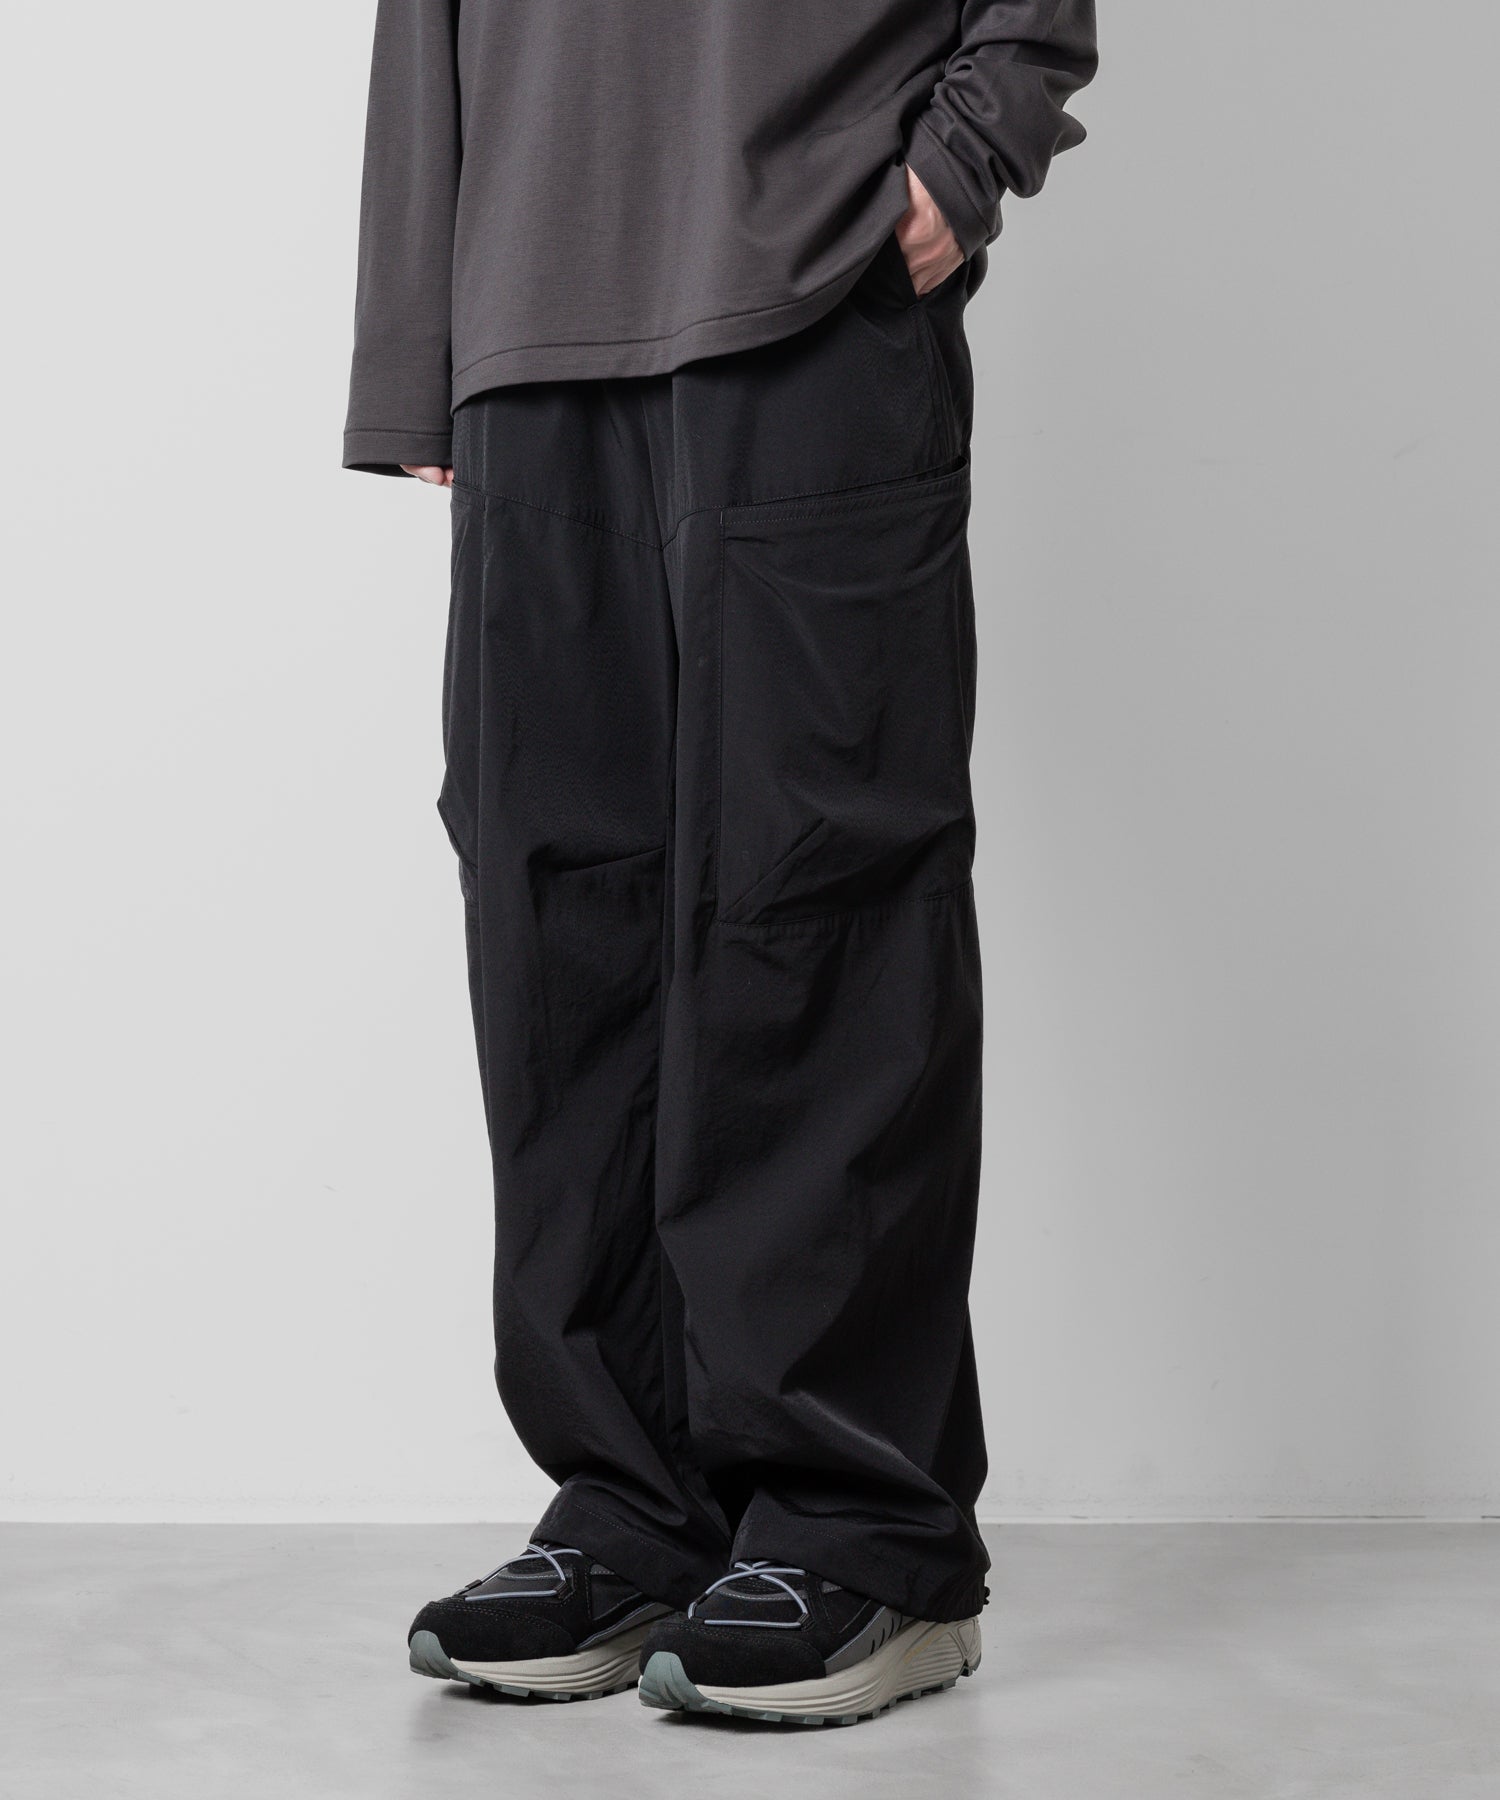 【ATTACHMENT】ATTACHMENT アタッチメントのCO/NY WEATHER CLOTH WIDE CARGO TROUSERS - BLACK  公式通販サイトsession福岡セレクトショップ